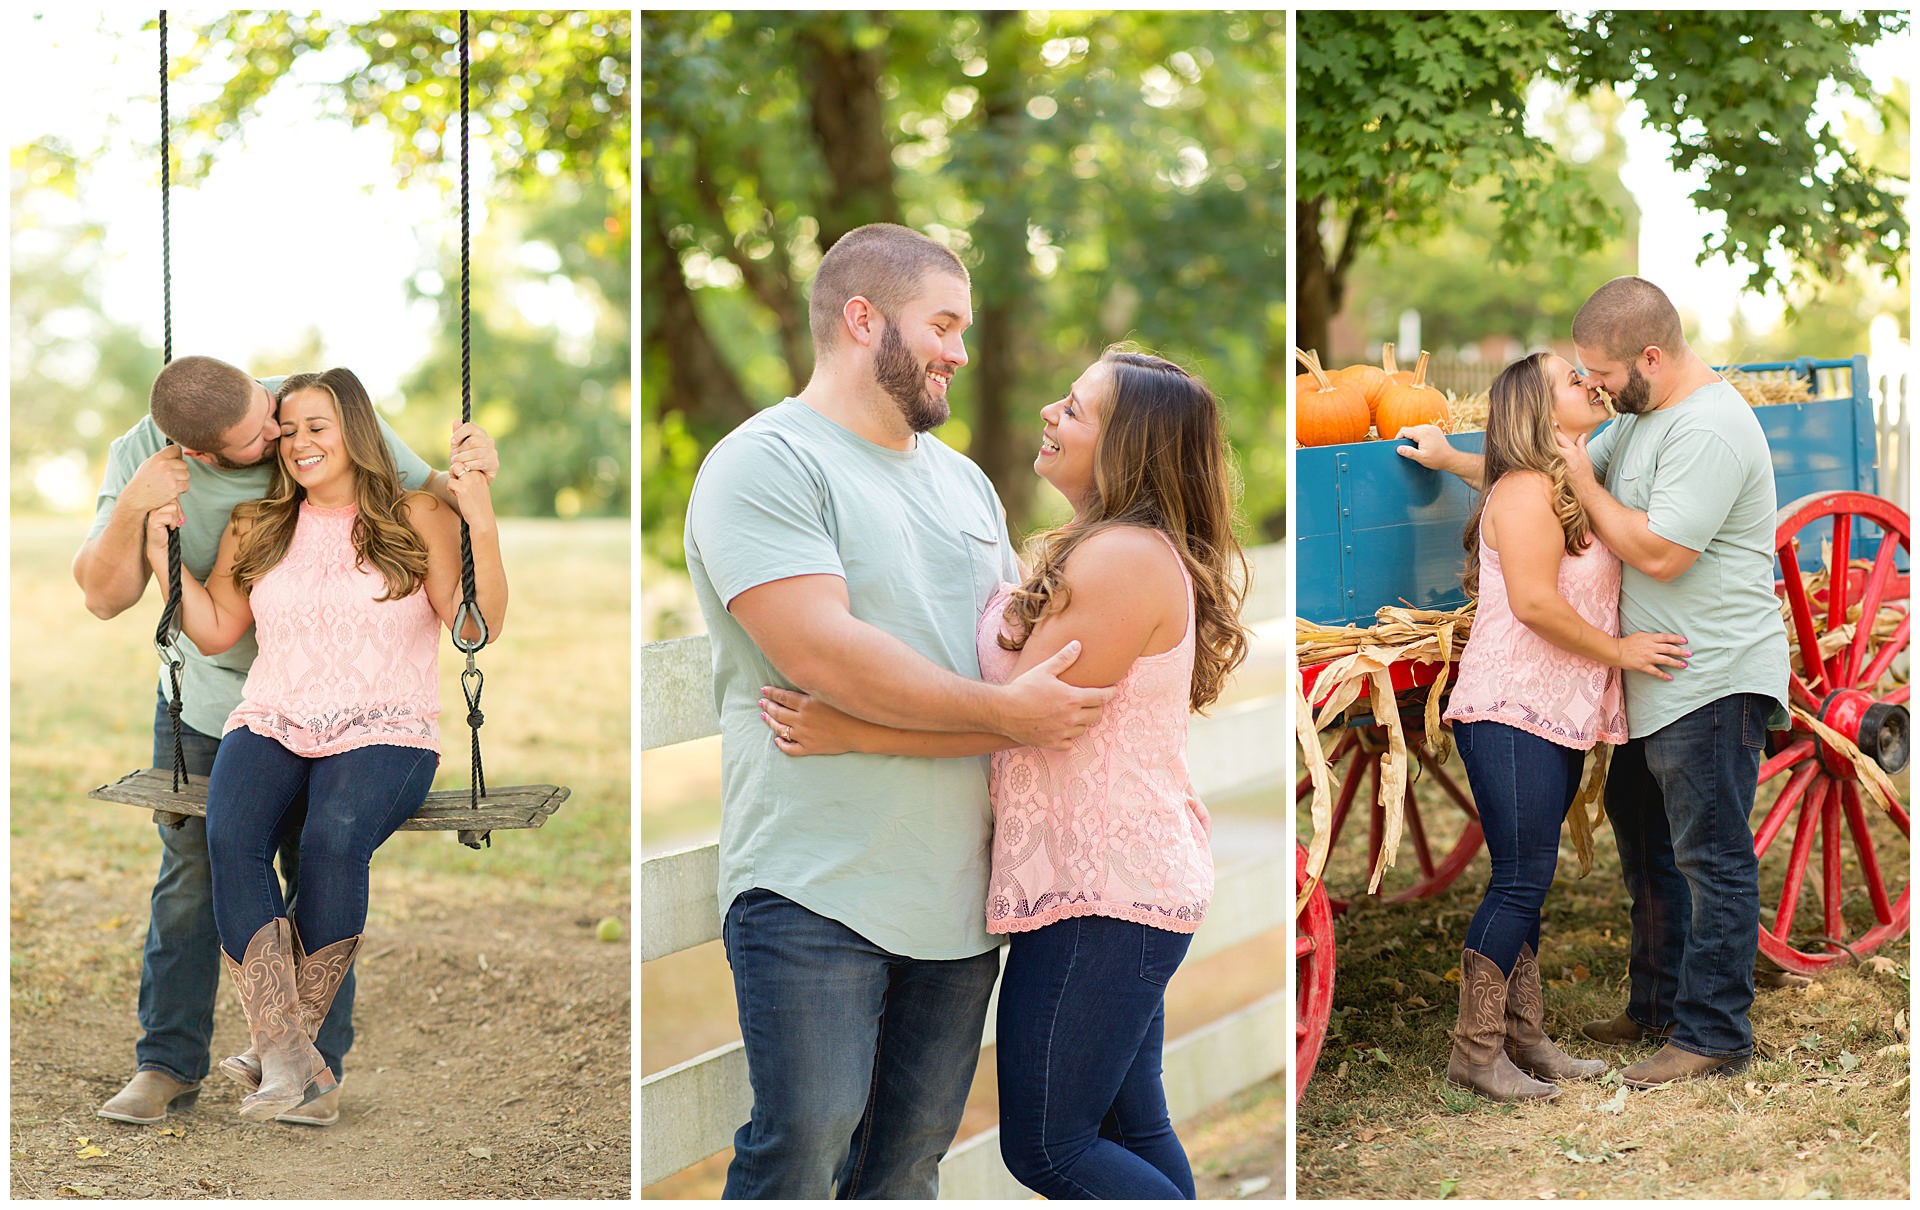 Fall Engagement Session at Shaker Village